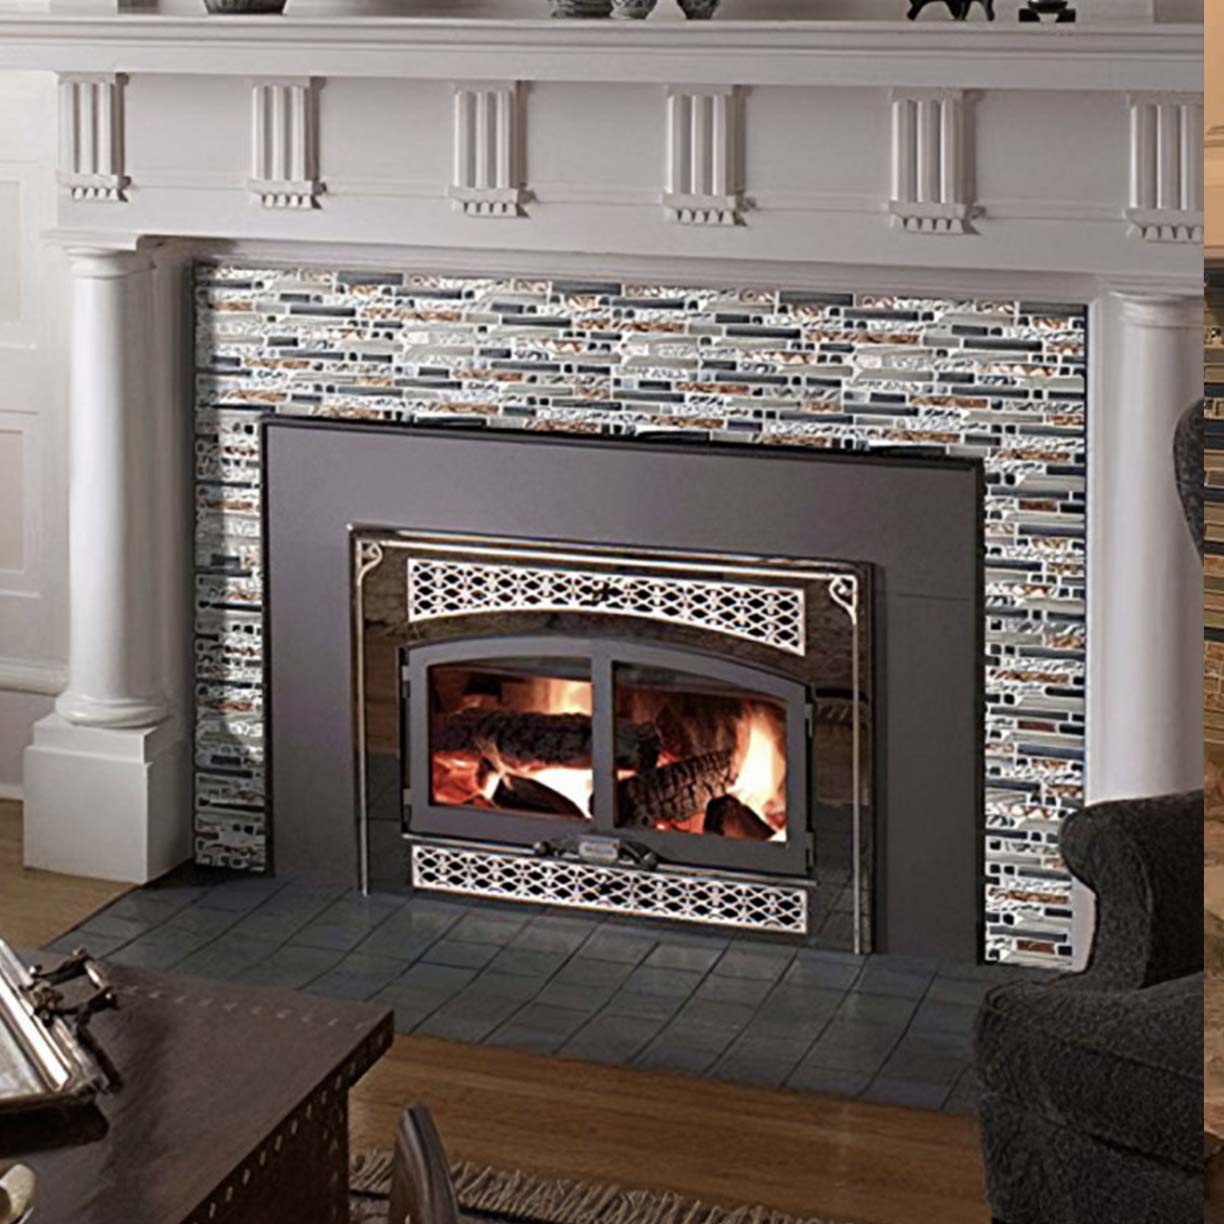 Fireplace Surround Wall Tile